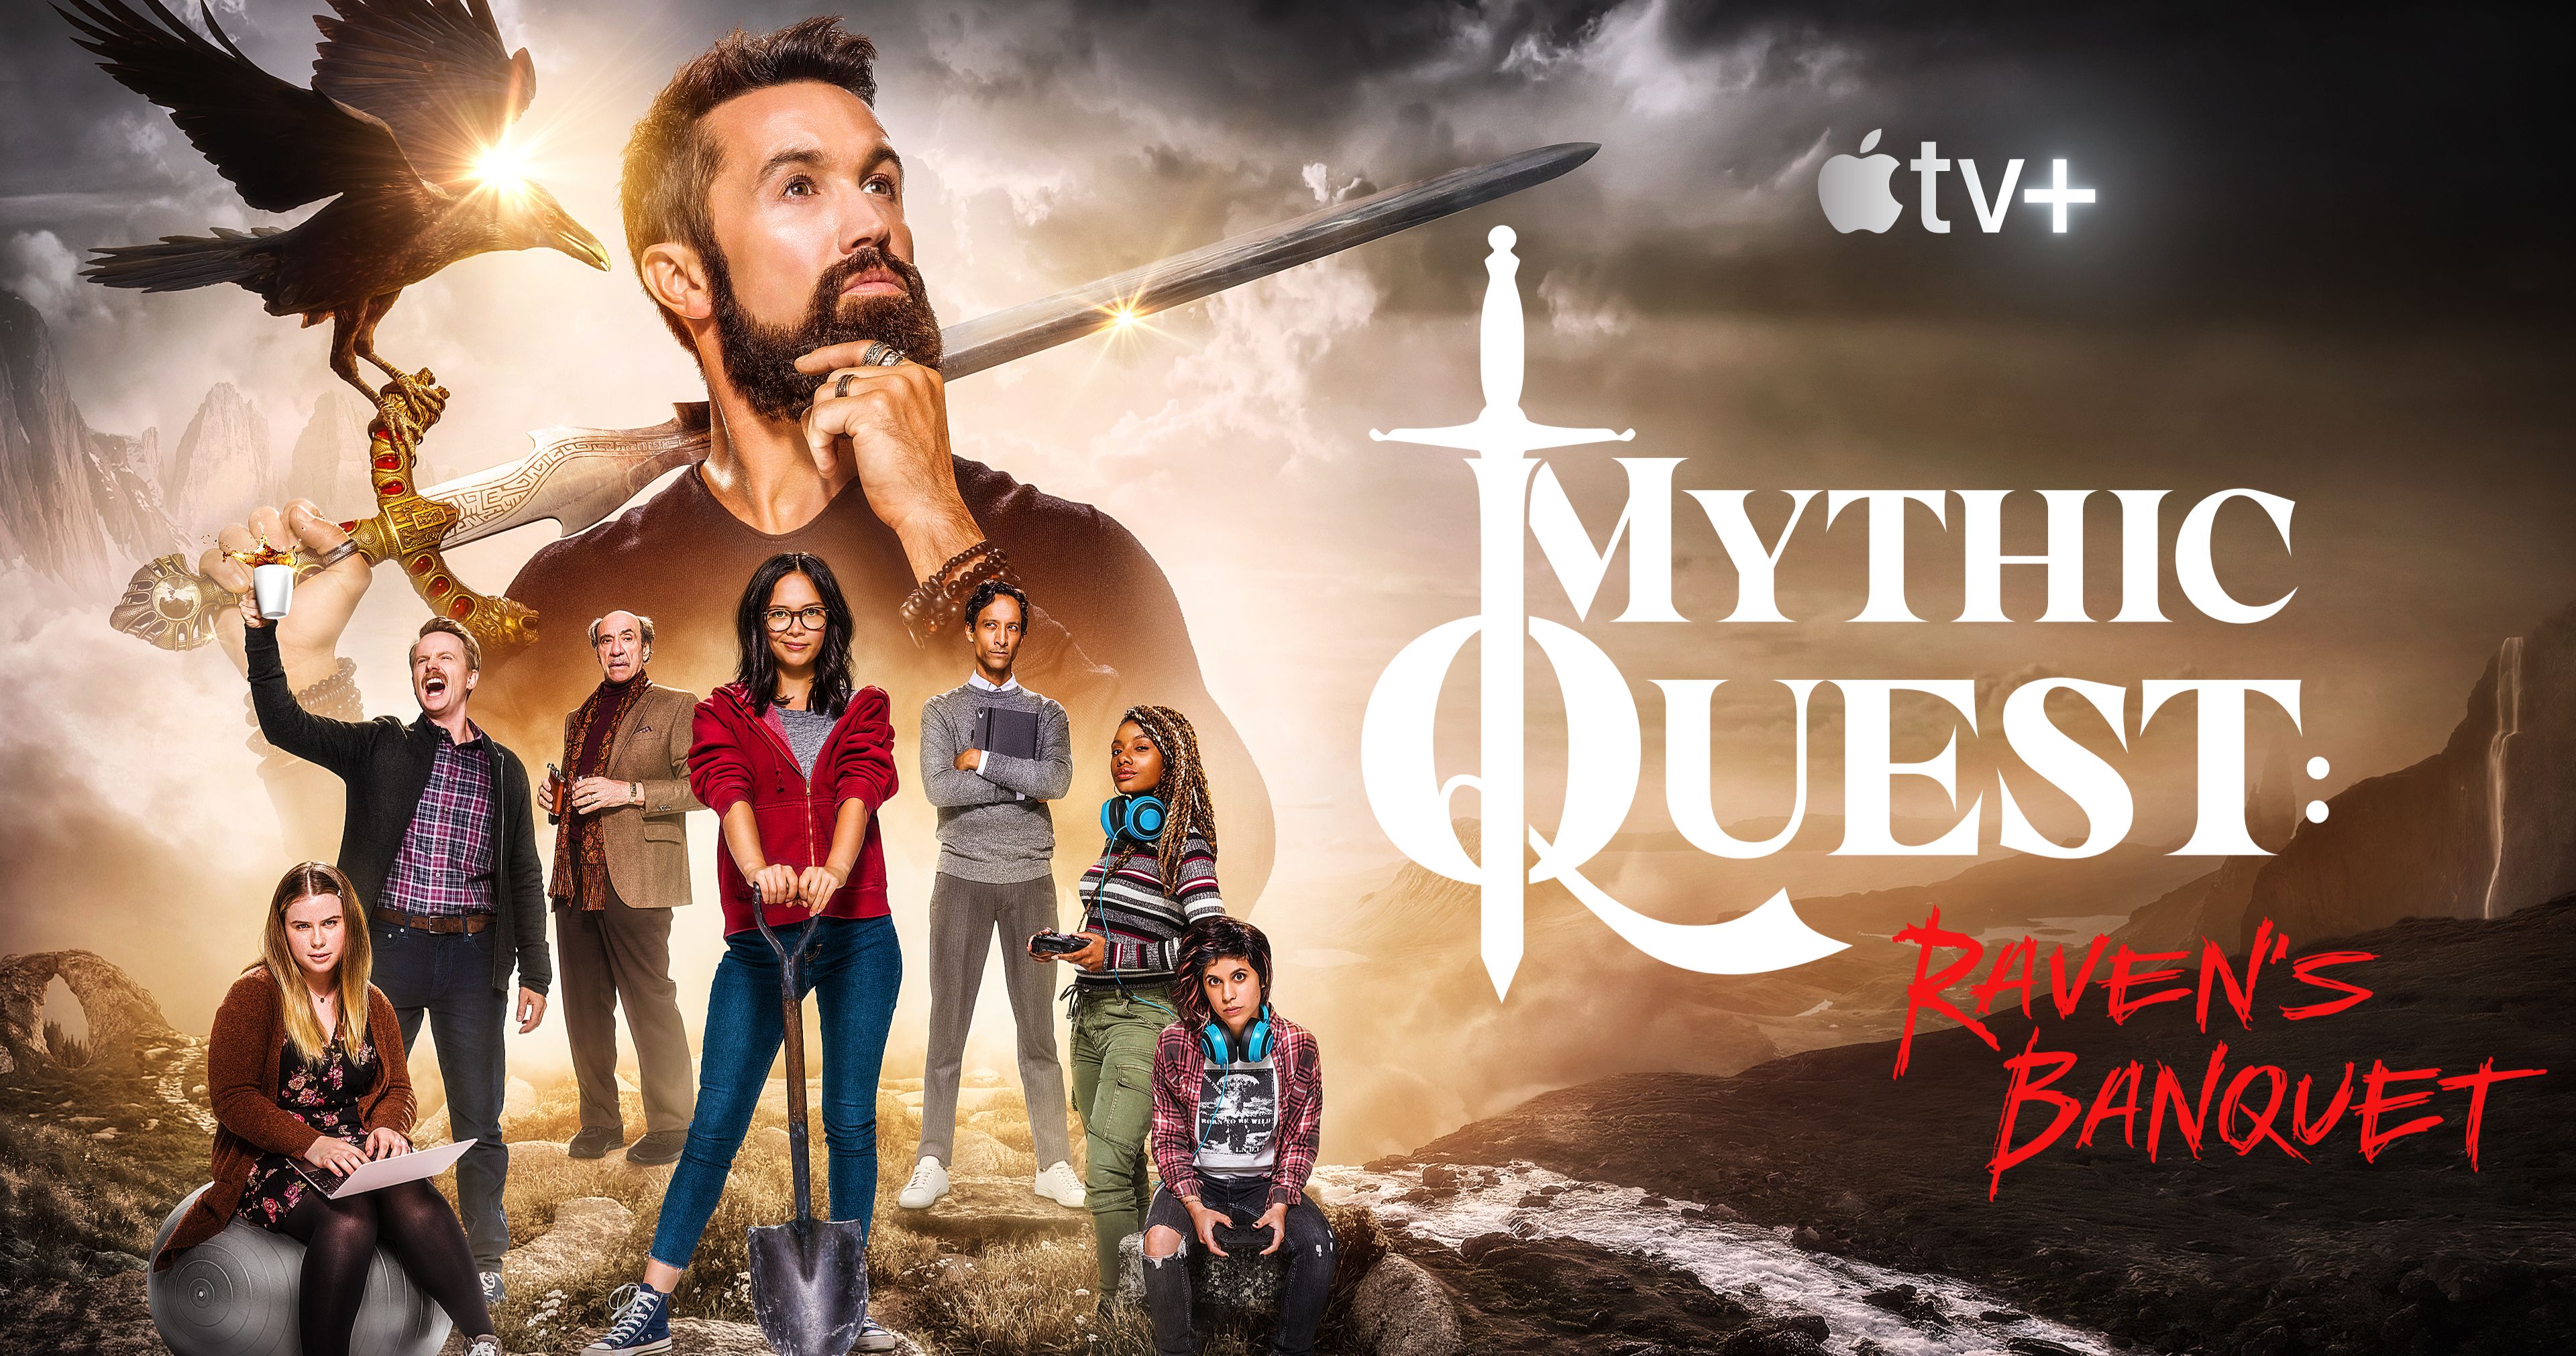 Mythic Quest Trailer Goes Deep on Video Game Developers from the It's Always Sunny Team